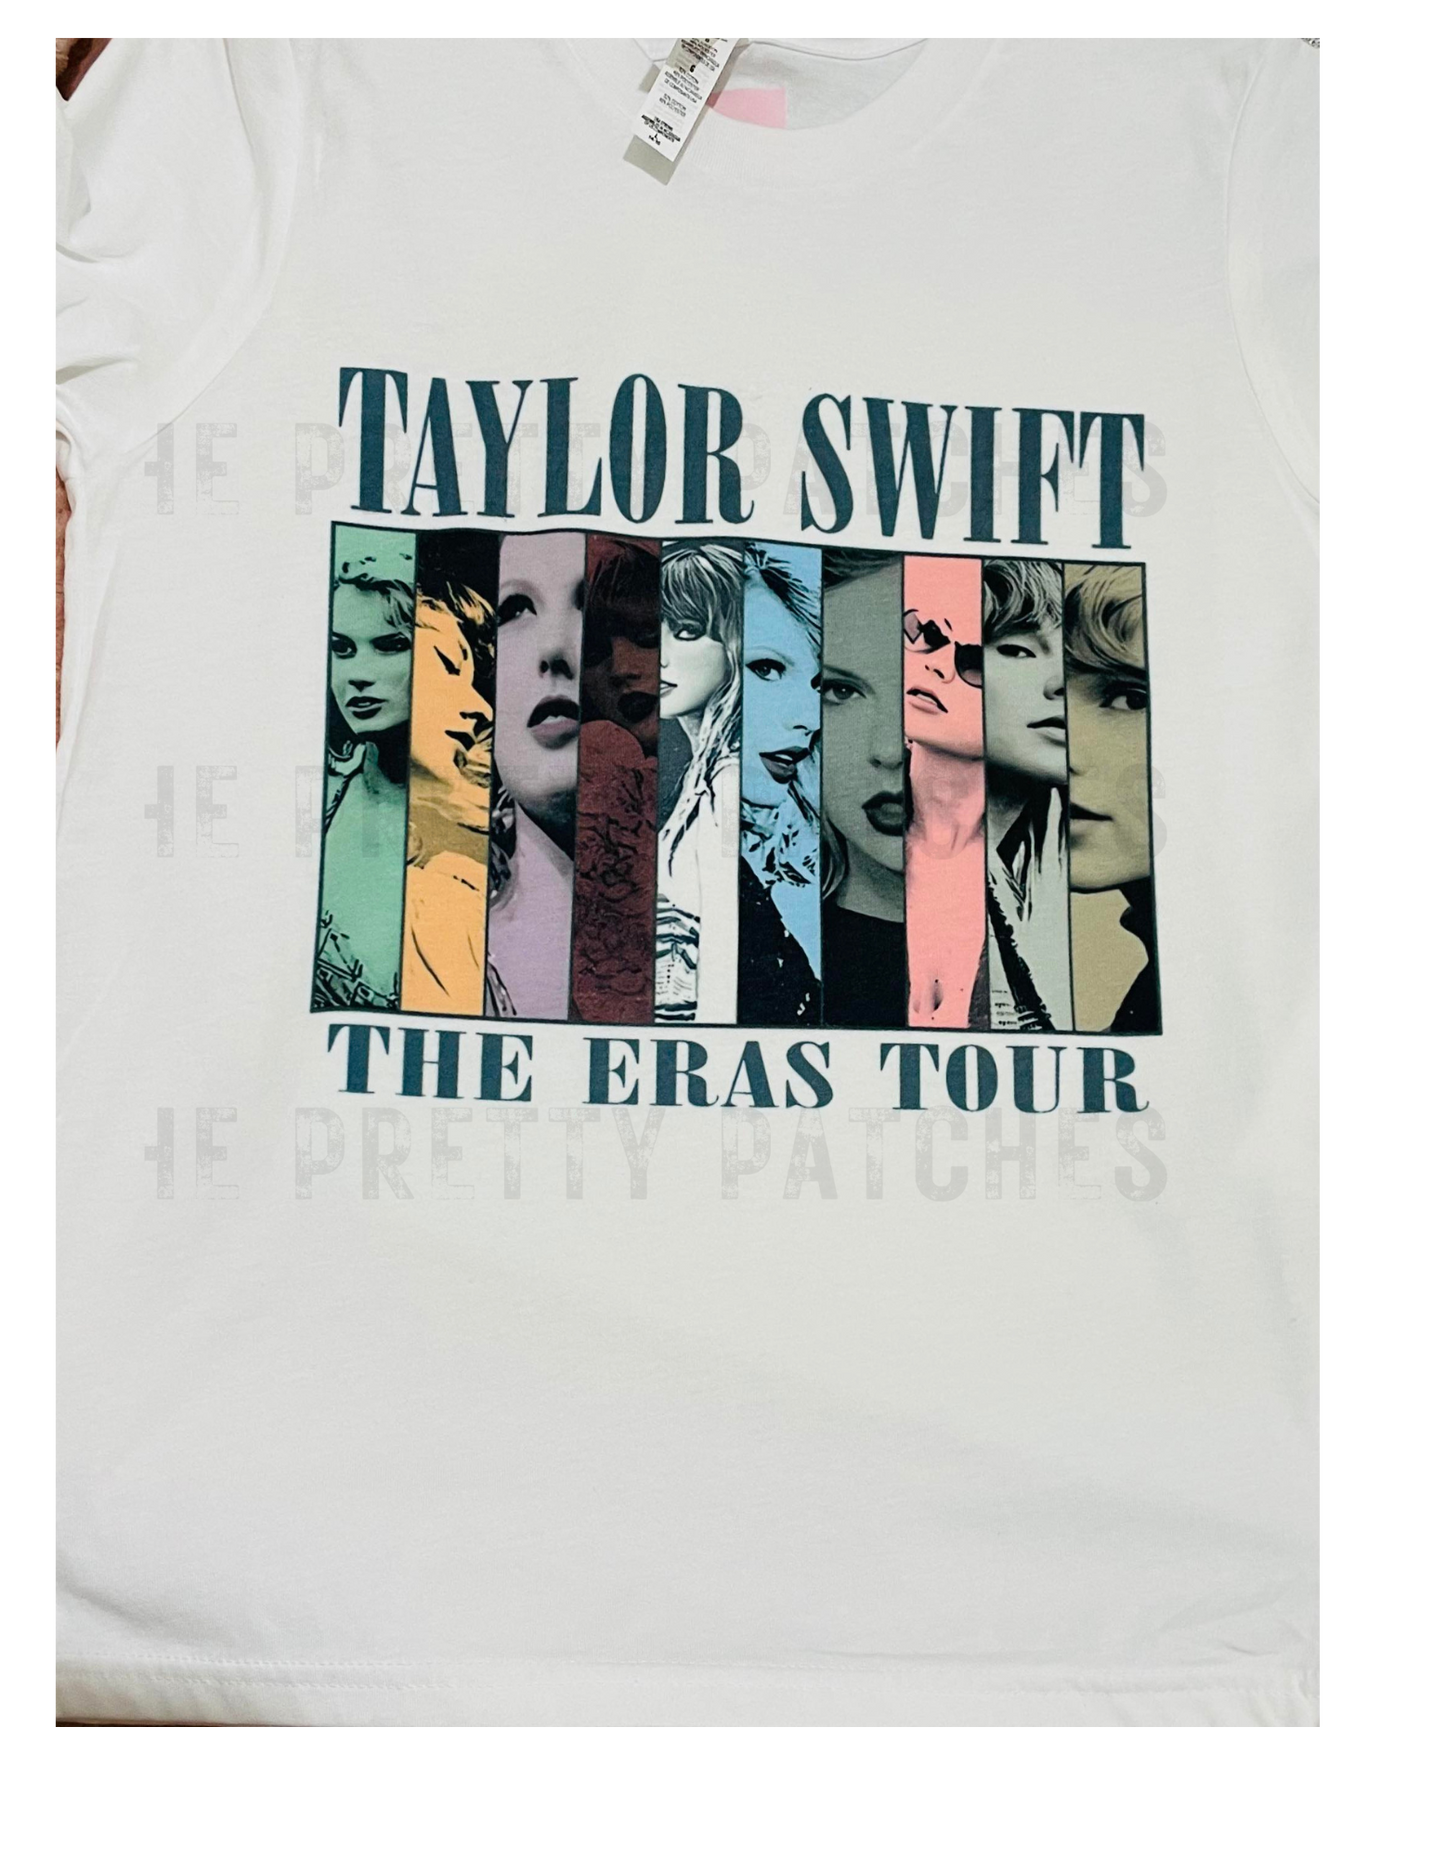 Taylor Swift The Eras tour "all different shades of colors "